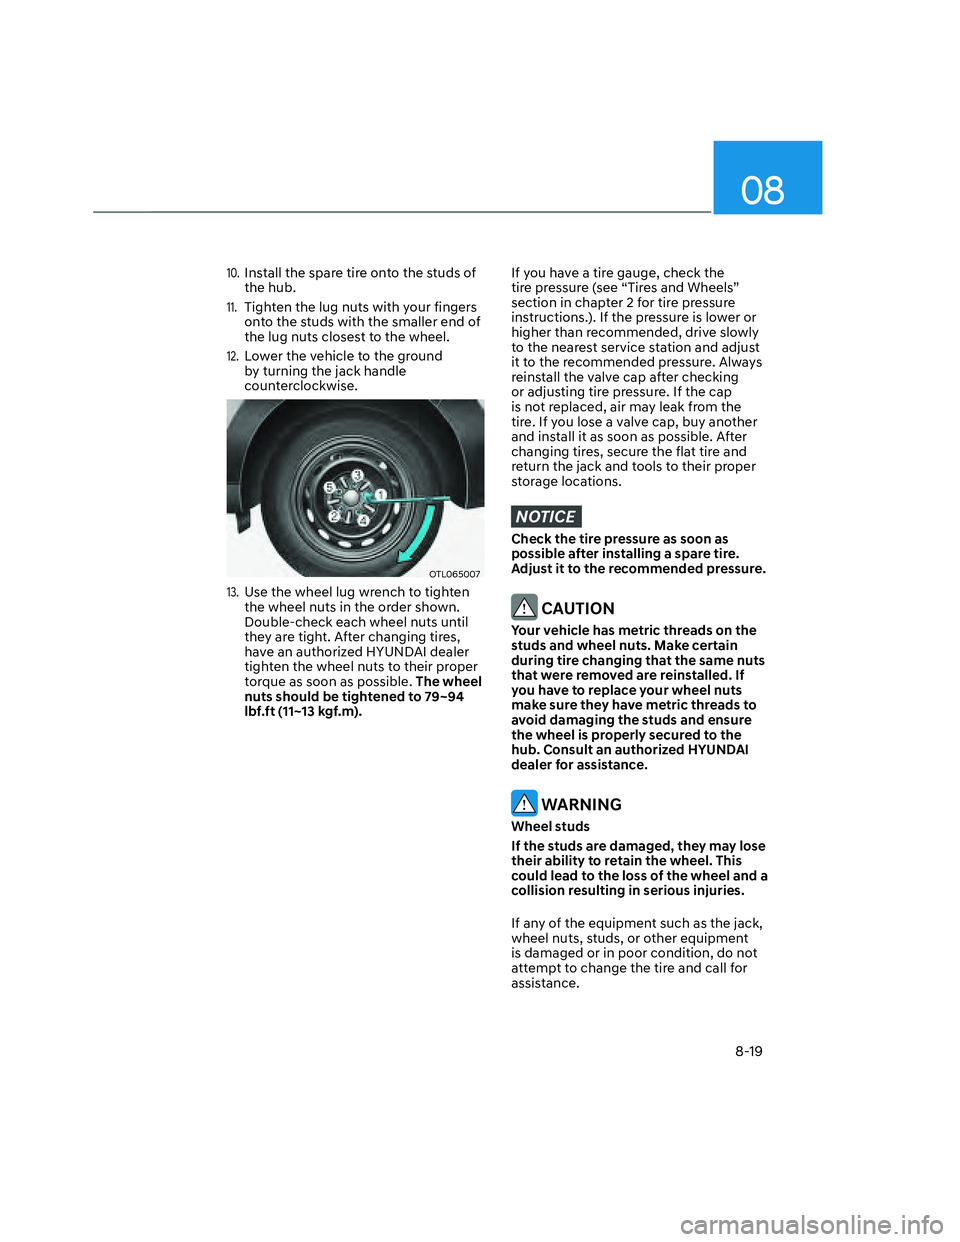 HYUNDAI SANTA CRUZ 2022  Owners Manual 08
8-19
10. Install the spare tire onto the studs of 
the hub. 
11. Tighten the lug nuts with your fingers 
onto the studs with the smaller end of 
the lug nuts closest to the wheel. 
12. Lower the ve